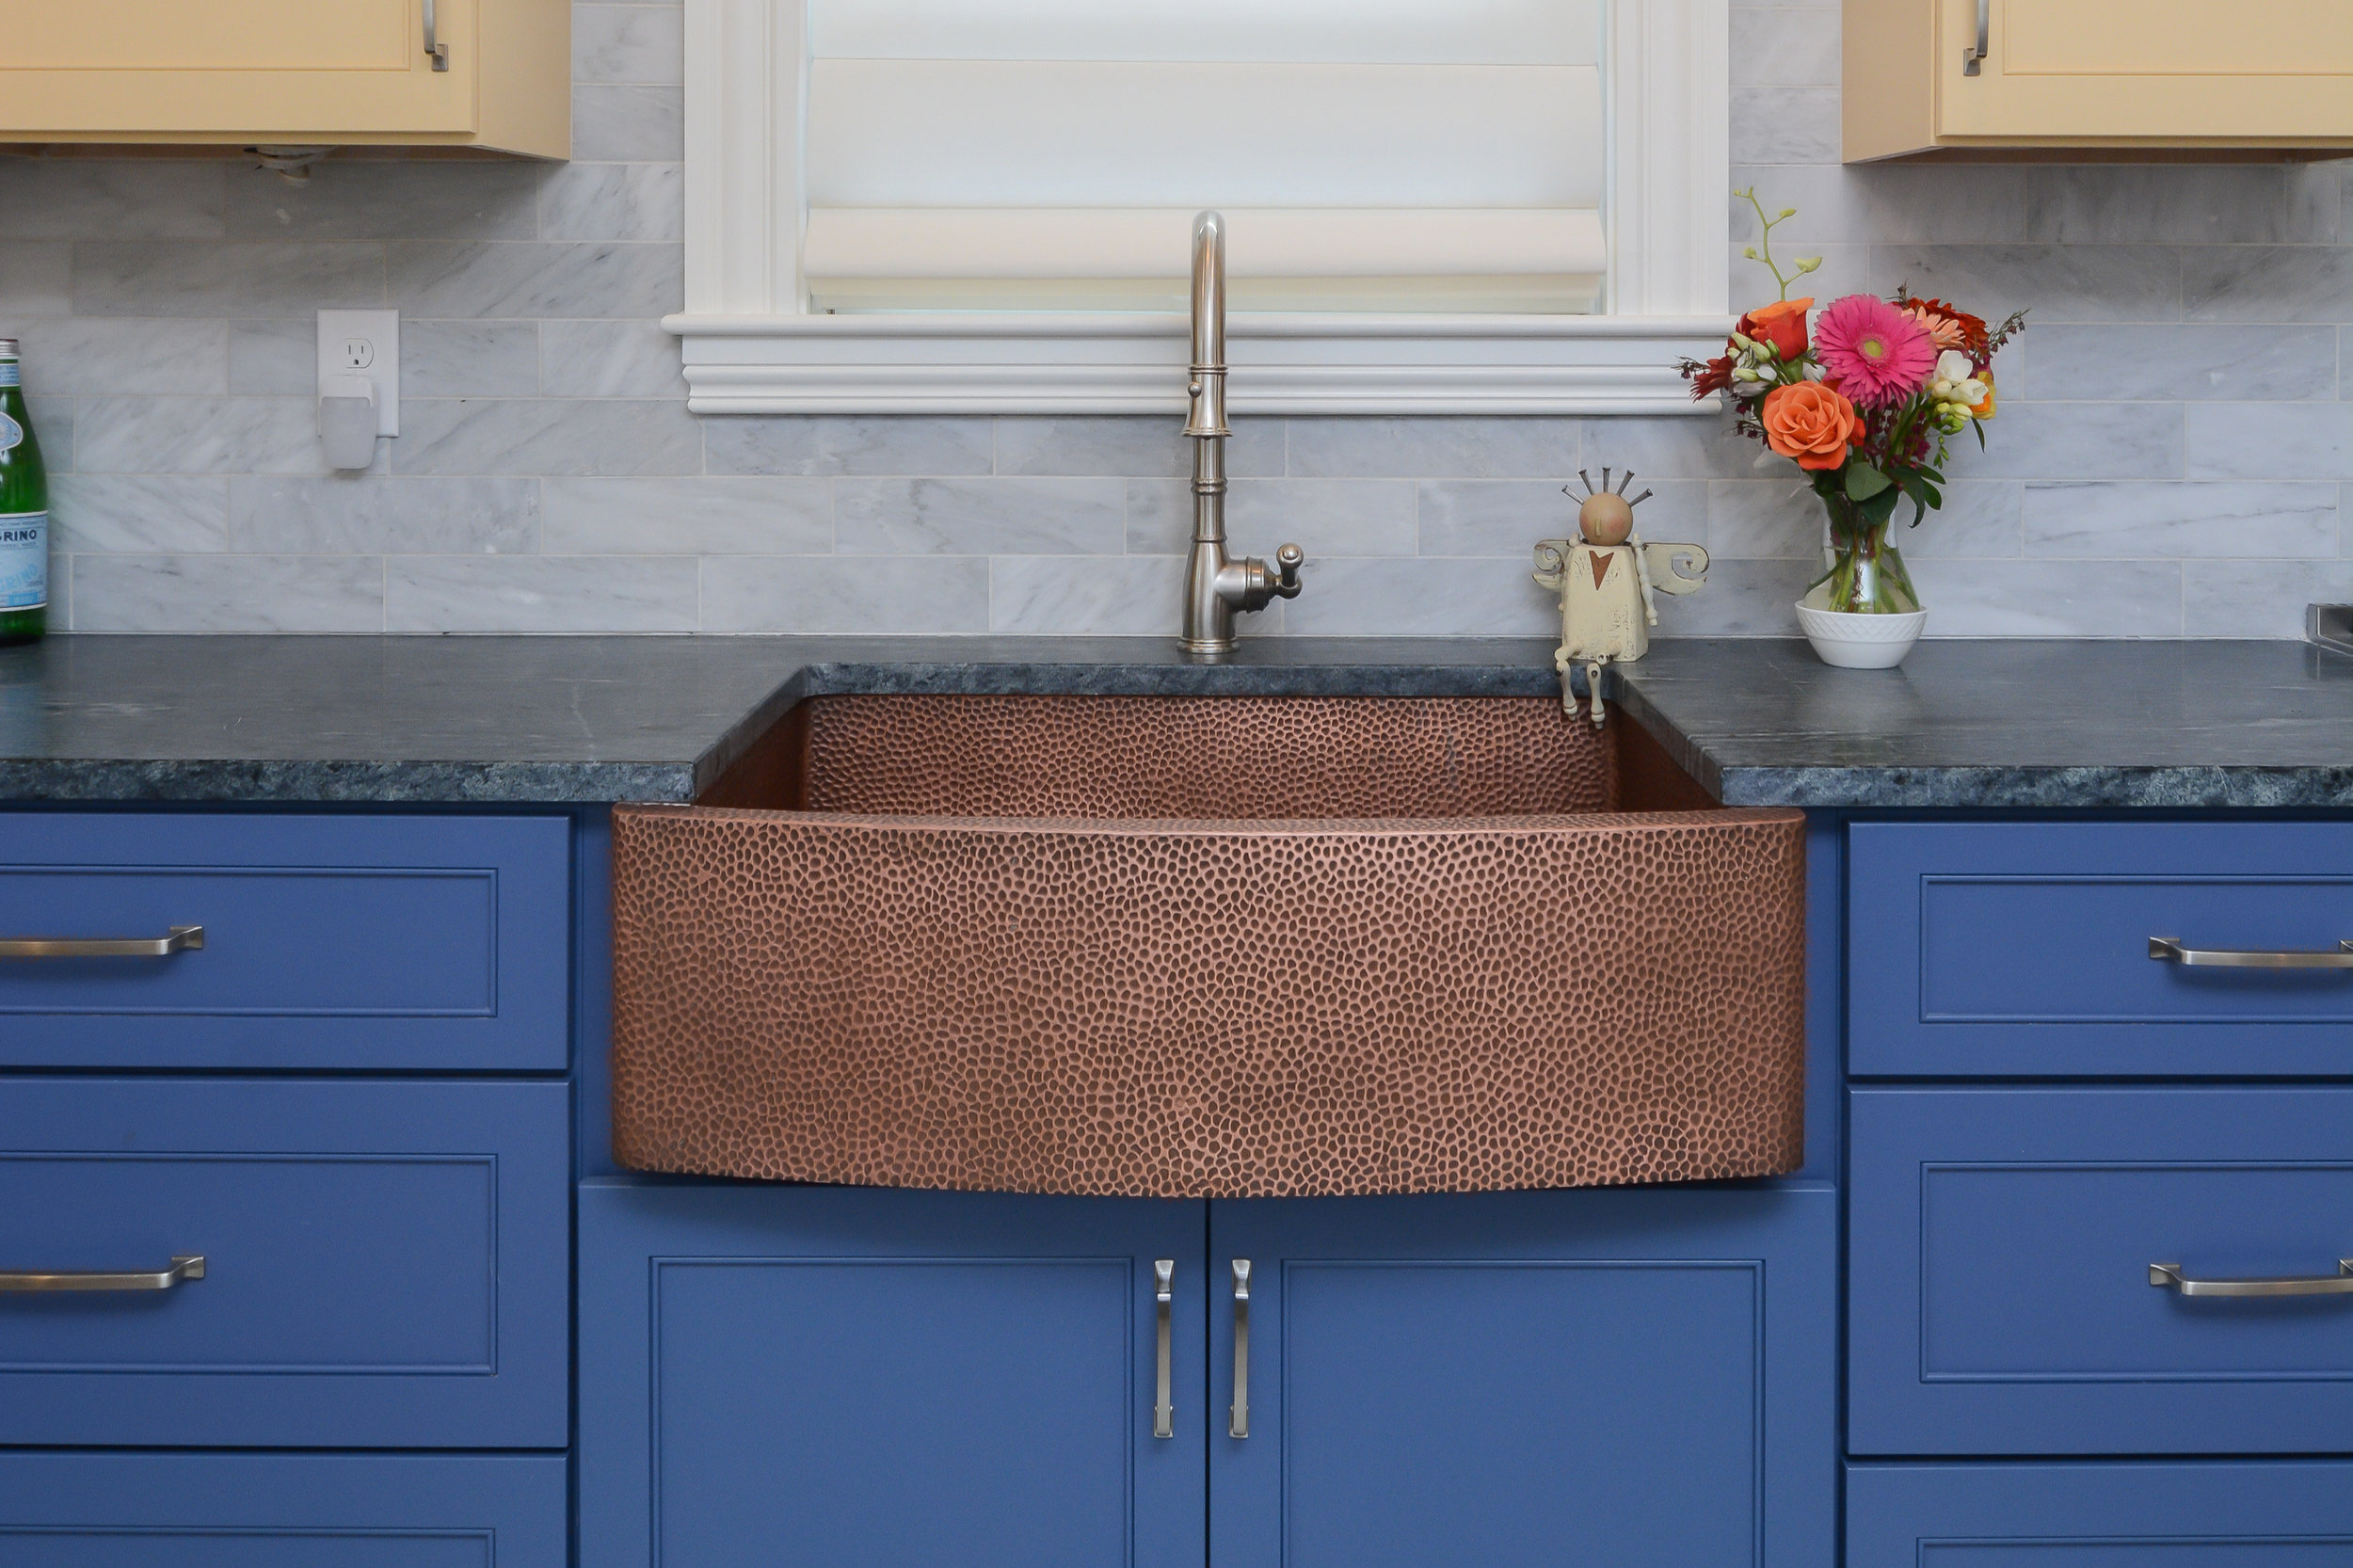 Hammered copper sink is the centerpiece